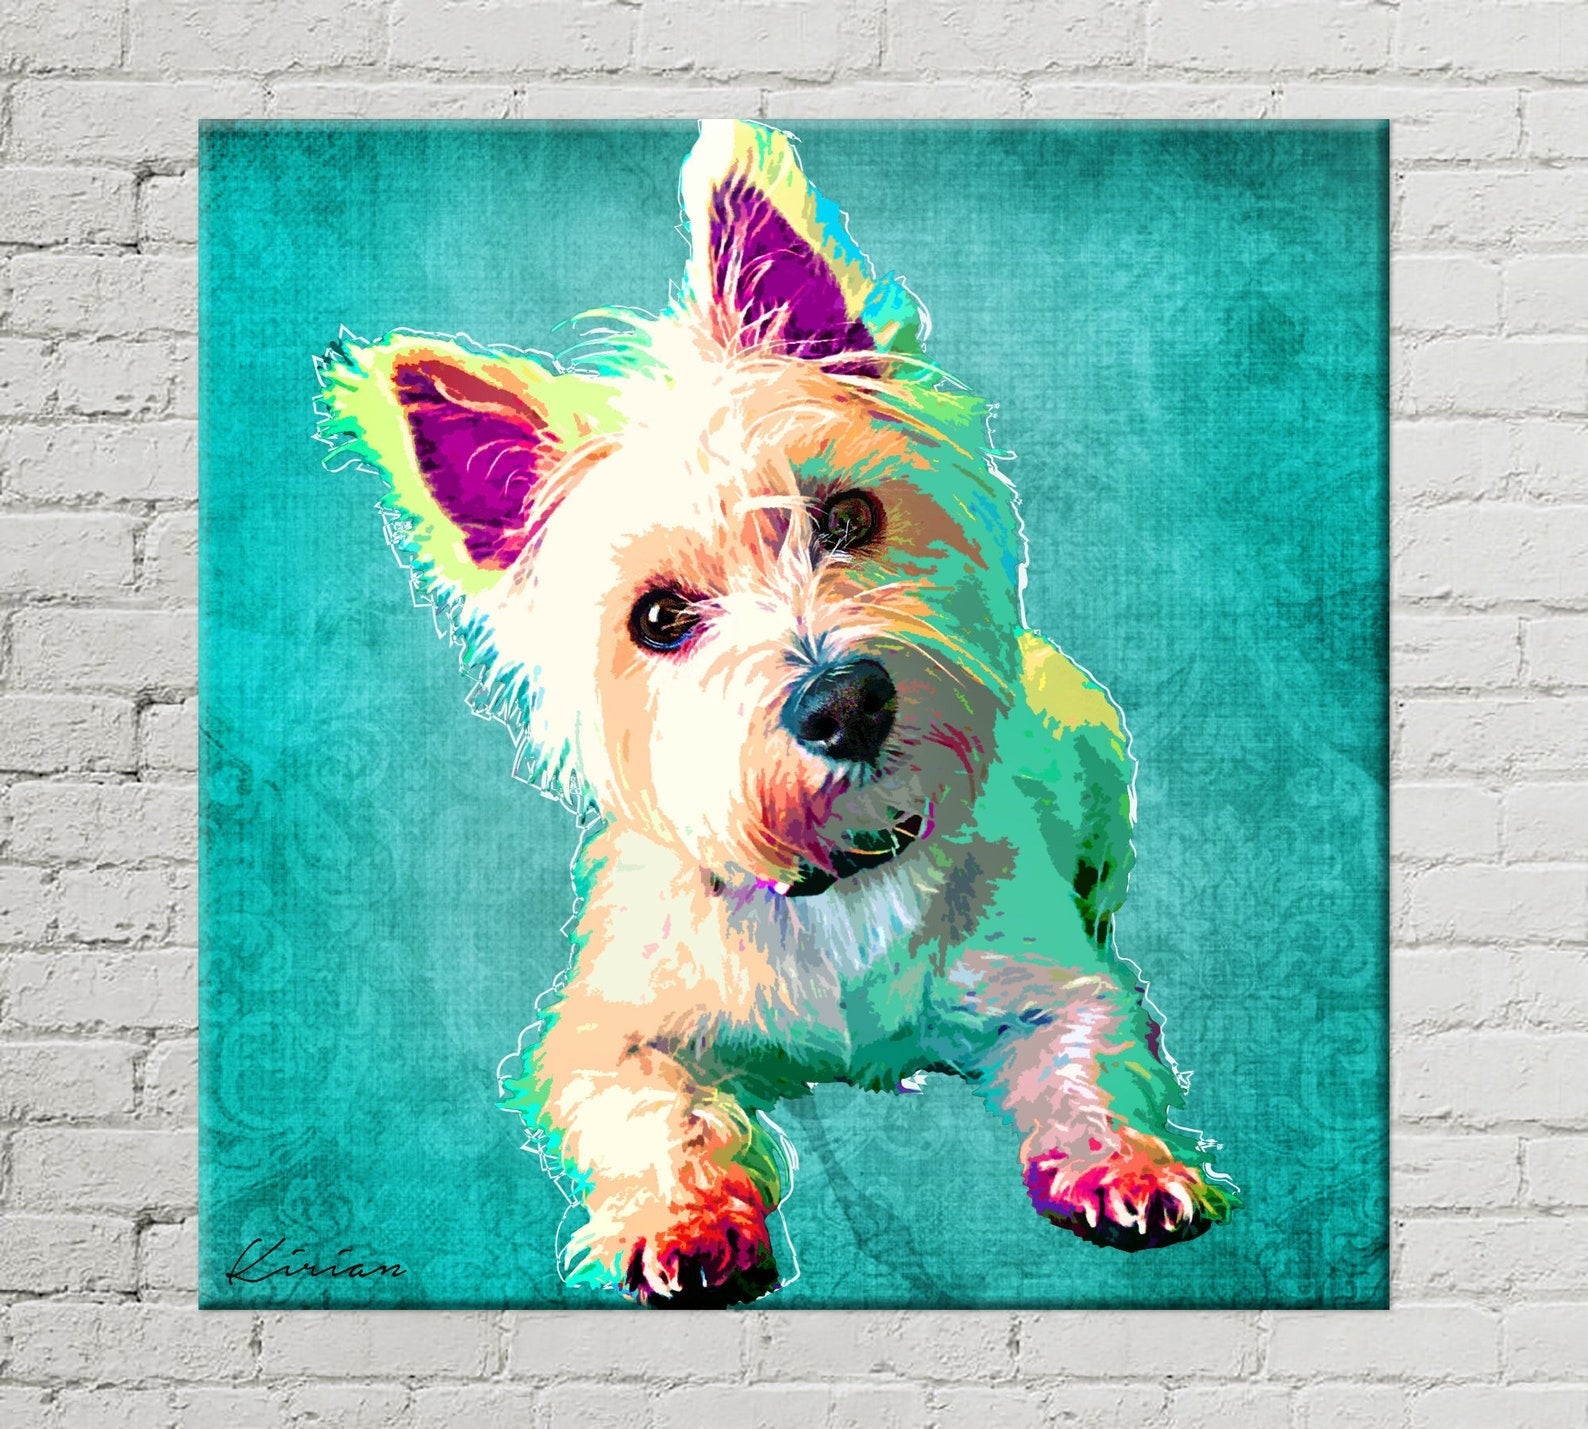 portrait of a small dog against a teal background